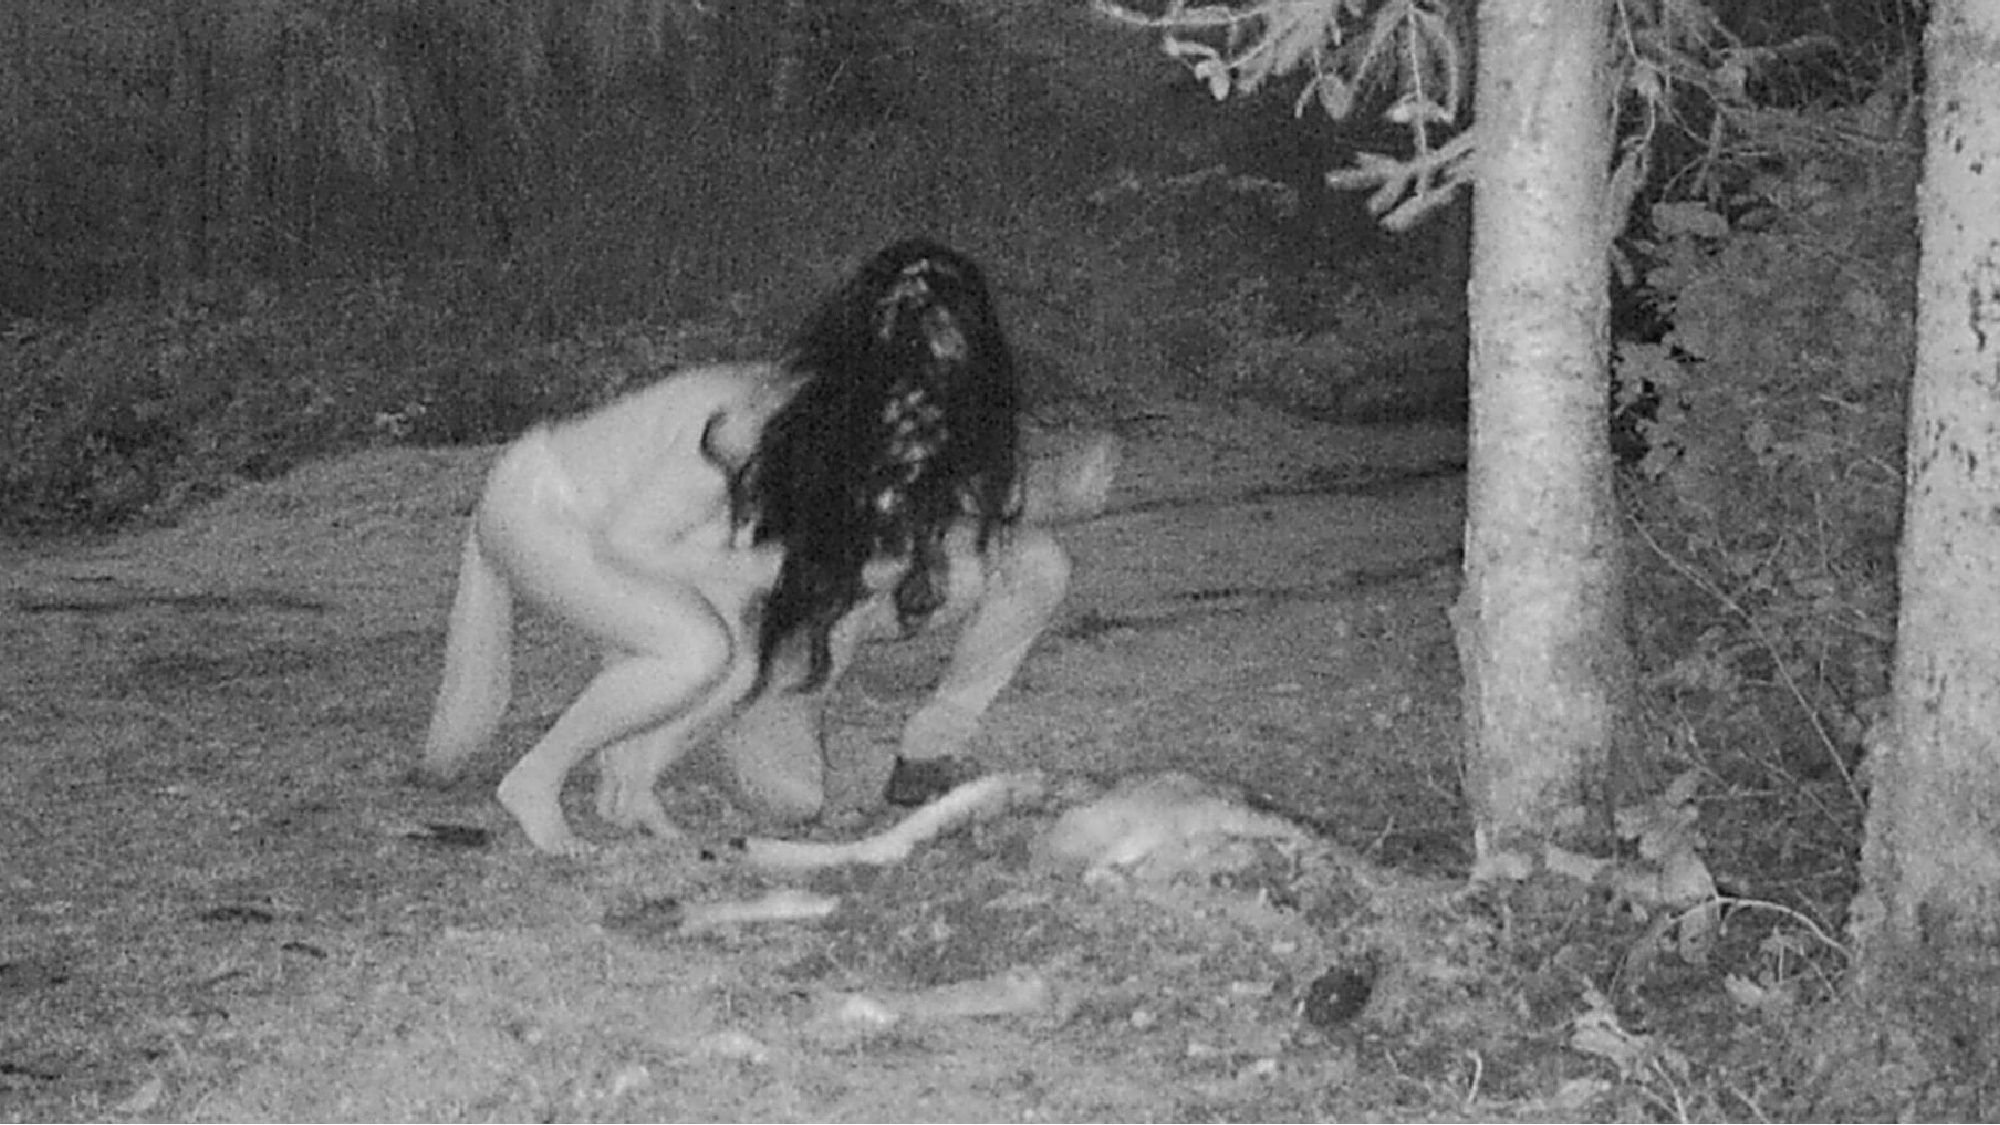 Naked Witches Caught on Camera, or the Greatest Trail Cam Prank of All Time?